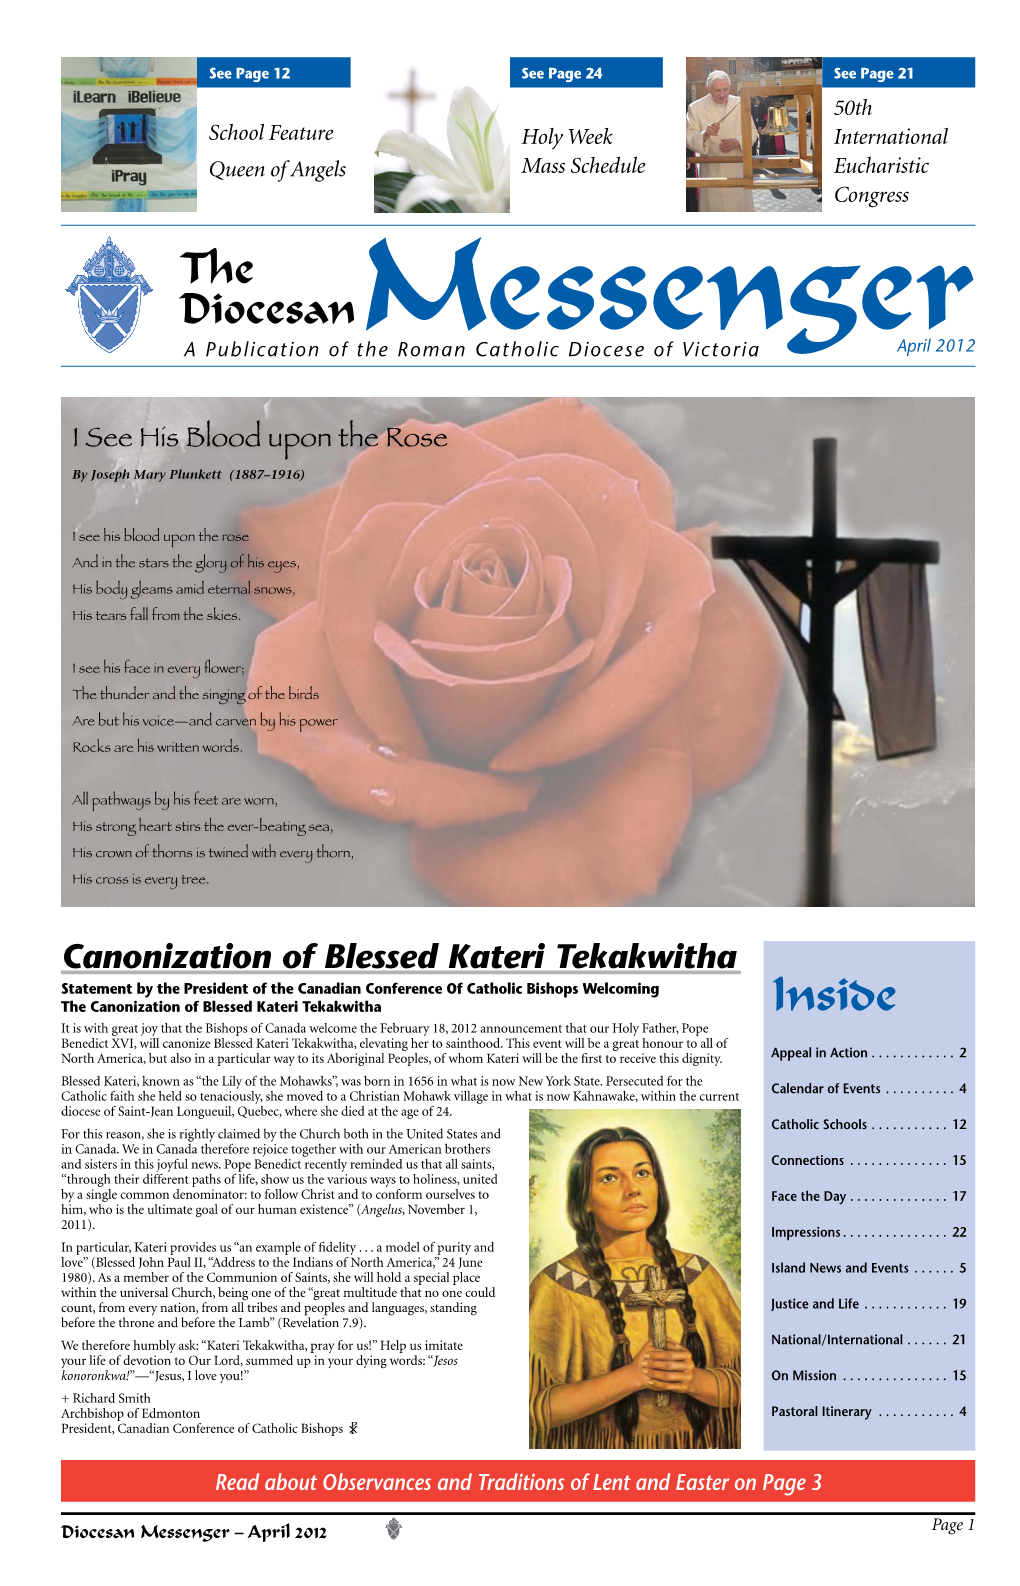 April 2012 a Publication of the Roman Catholic Diocese of Victoria